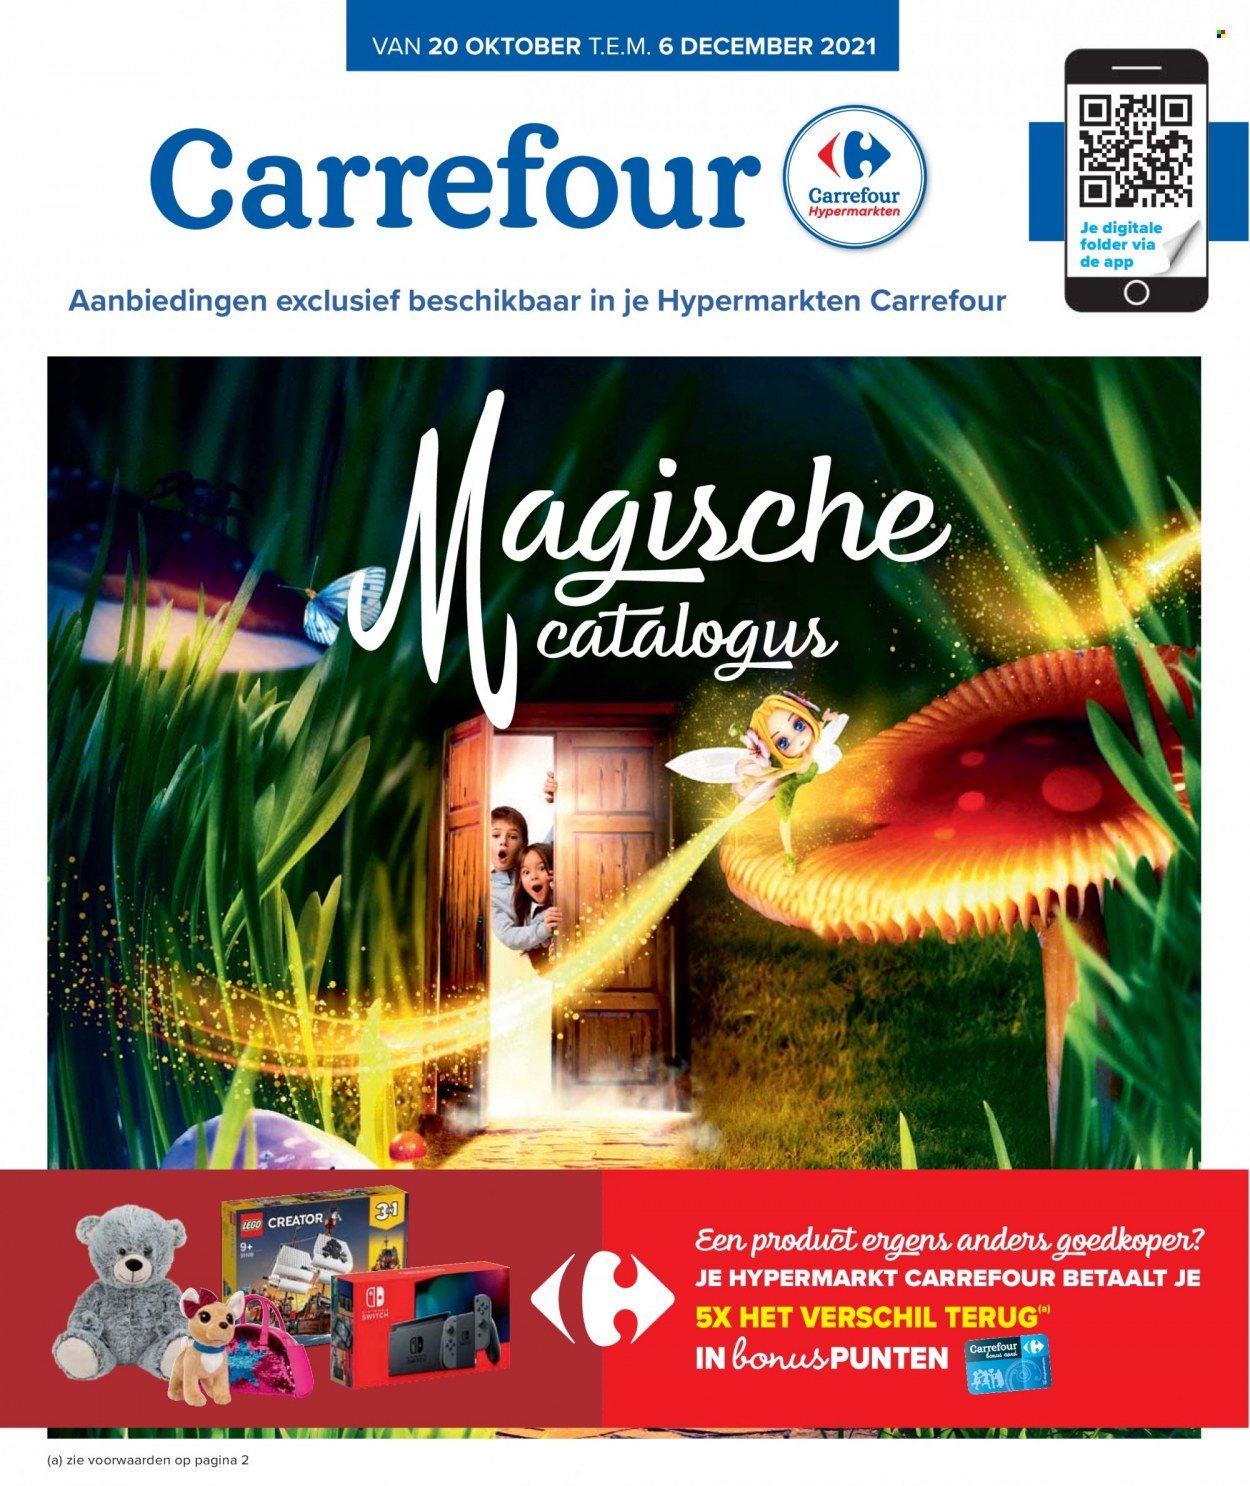 Catalogue Carrefour hypermarkt - 20.10.2021 - 6.12.2021. Page 1.